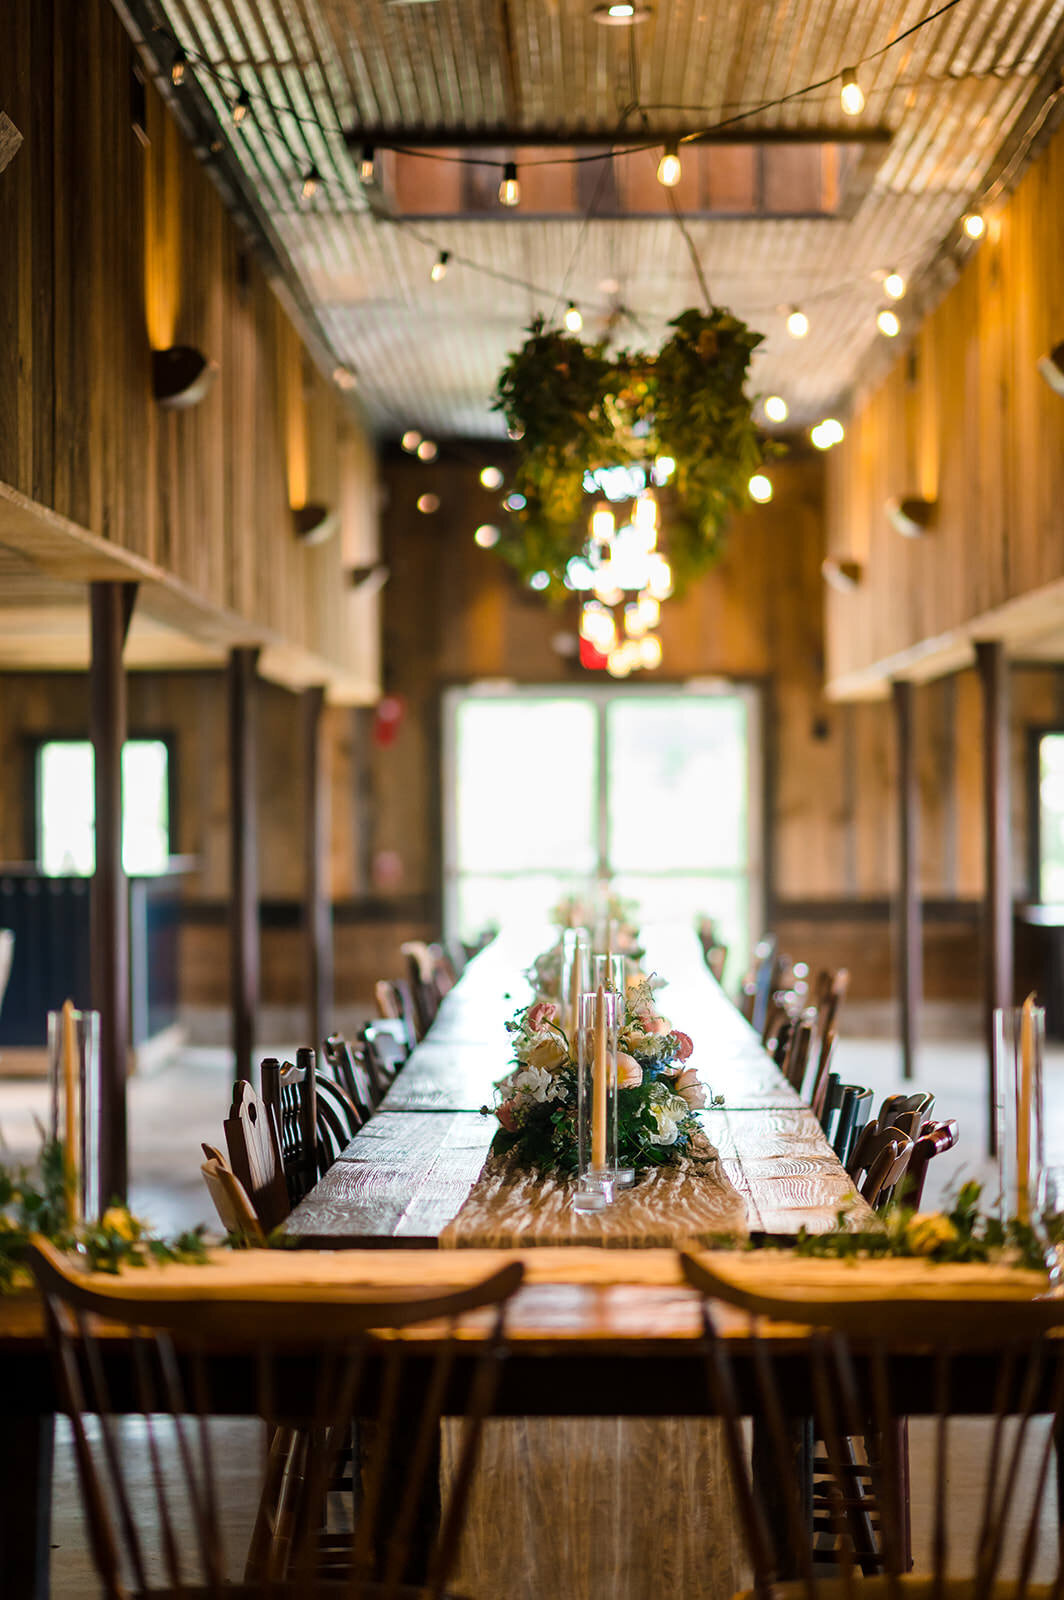 A long, elegant wedding reception table set in a rustic barn venue, adorned with natural greenery, flowers, and warm, ambient lighting